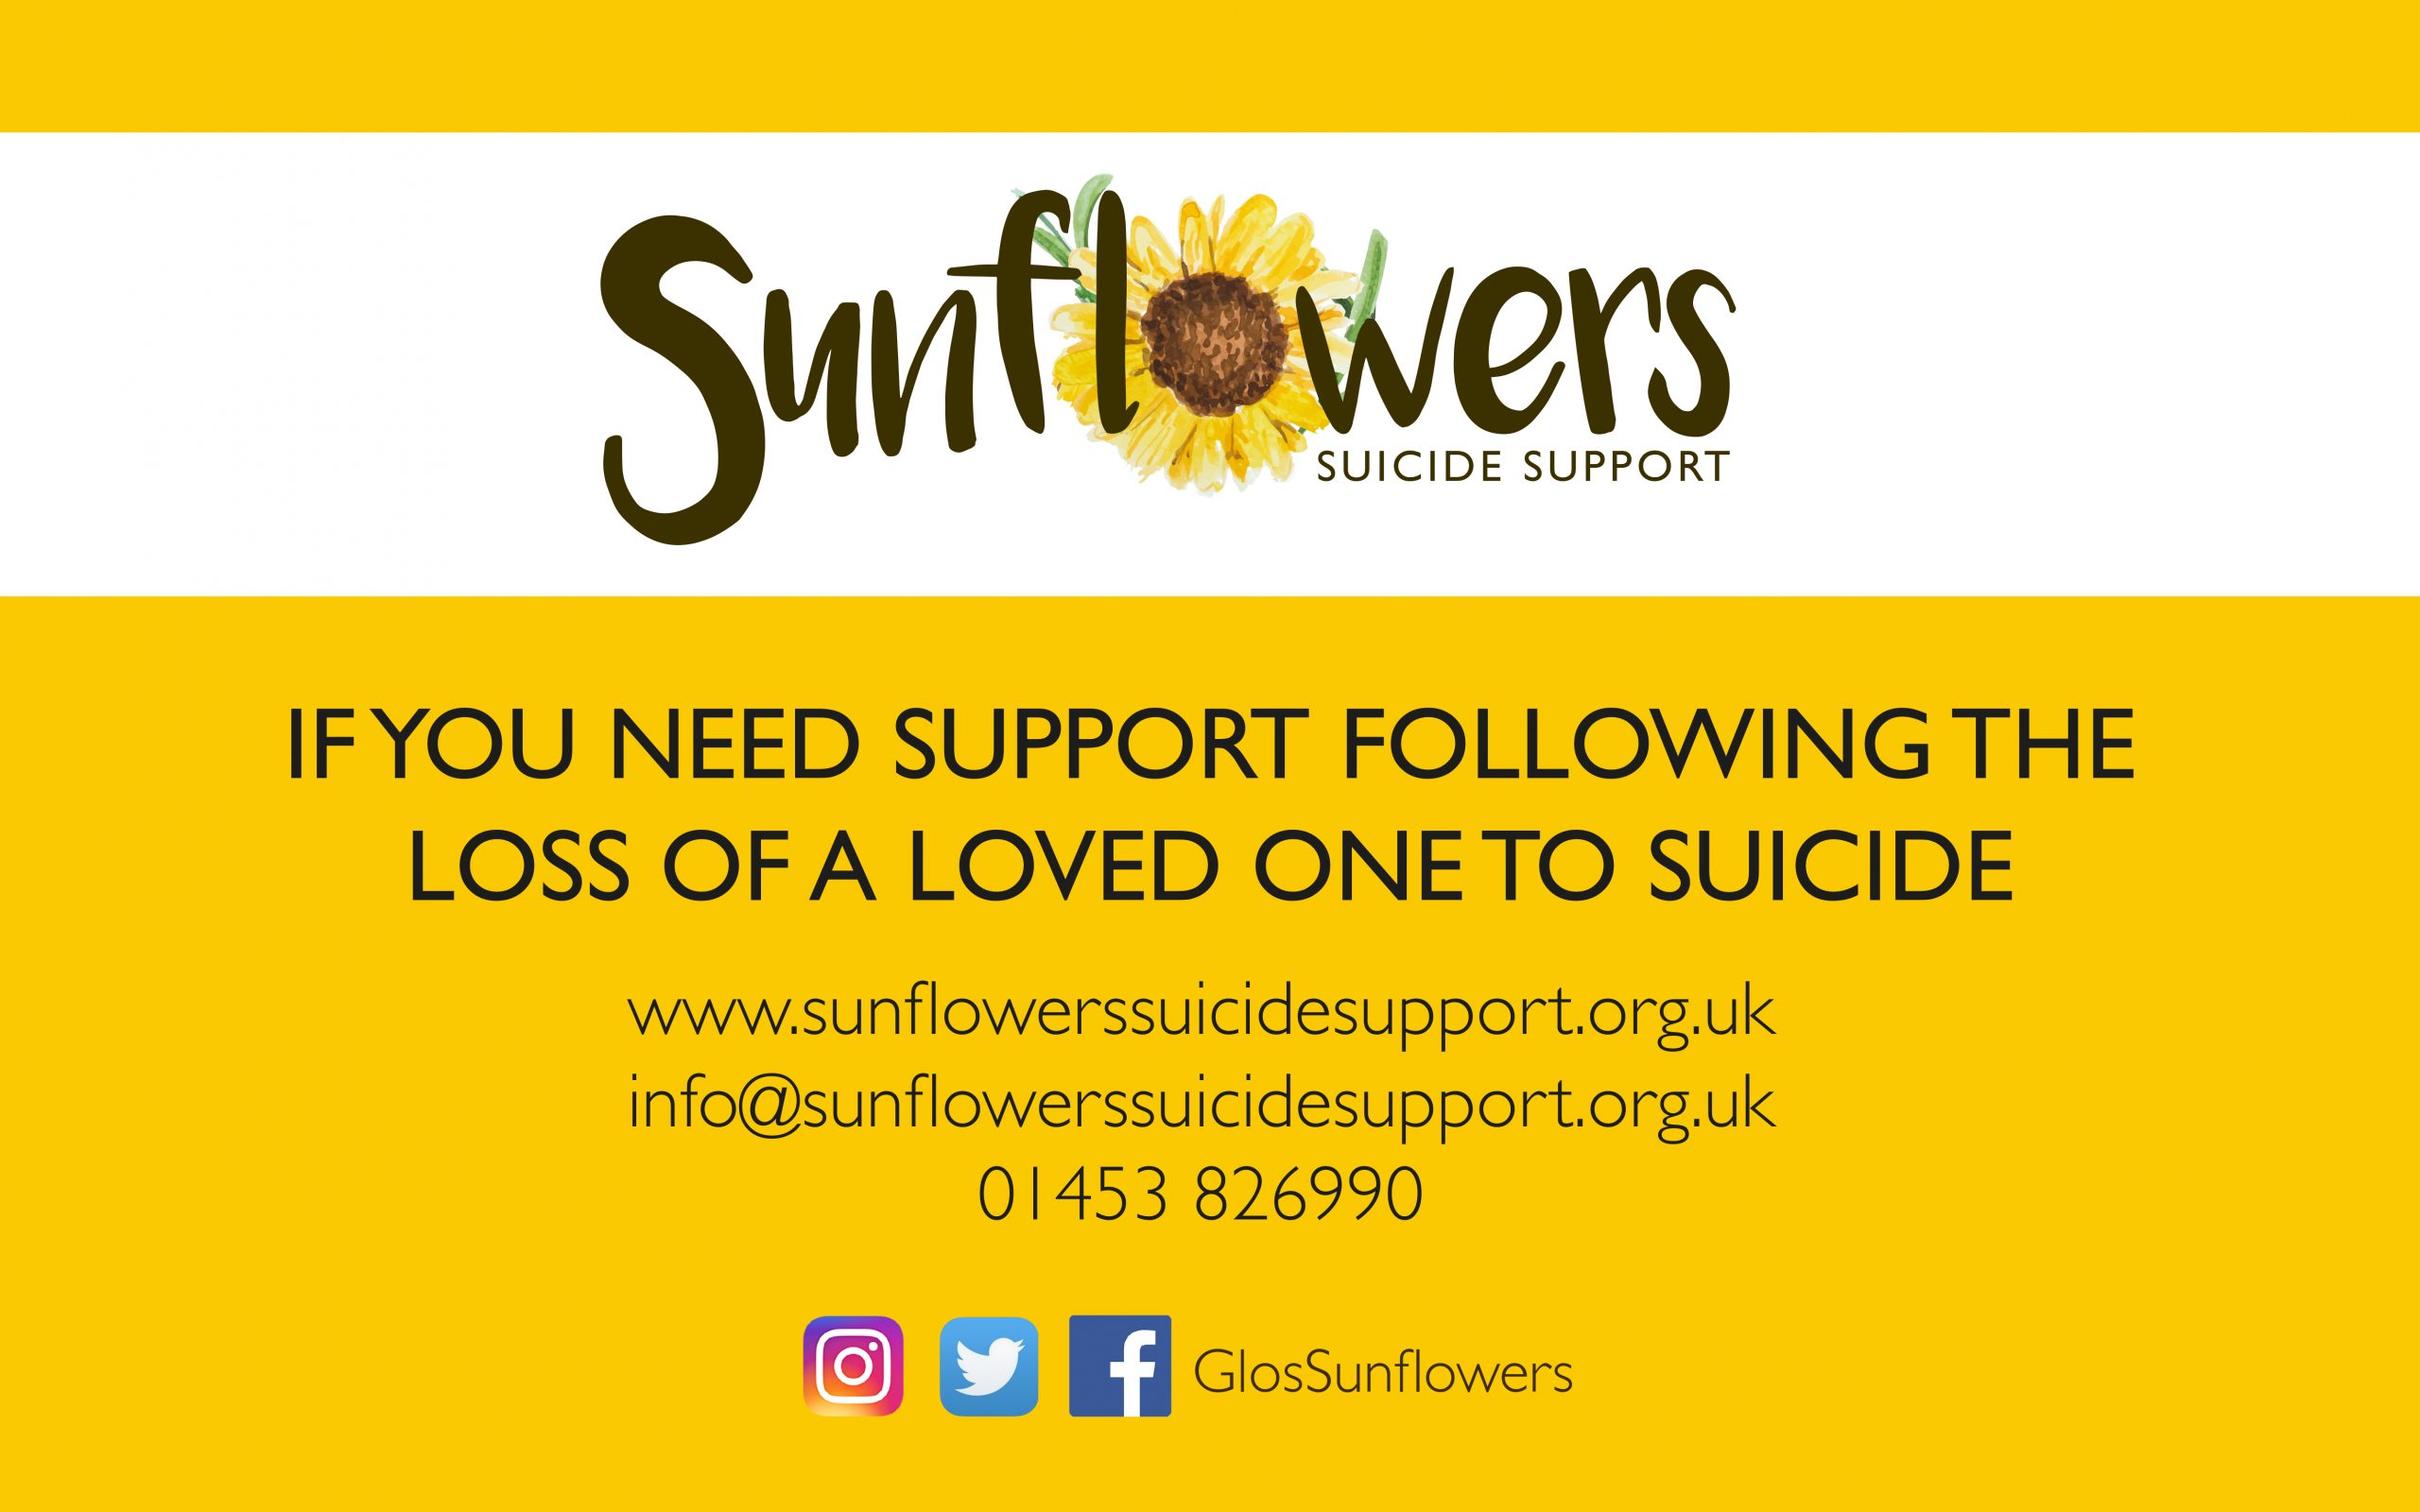 Text reading: Sunflowers suicide support. If you need support following the loss of a loved one to suicide. Visit www.sunflowerssuicidesupport.org.uk. Email info@sunflowerssuicidesupport.org.uk. Call 01453 826990